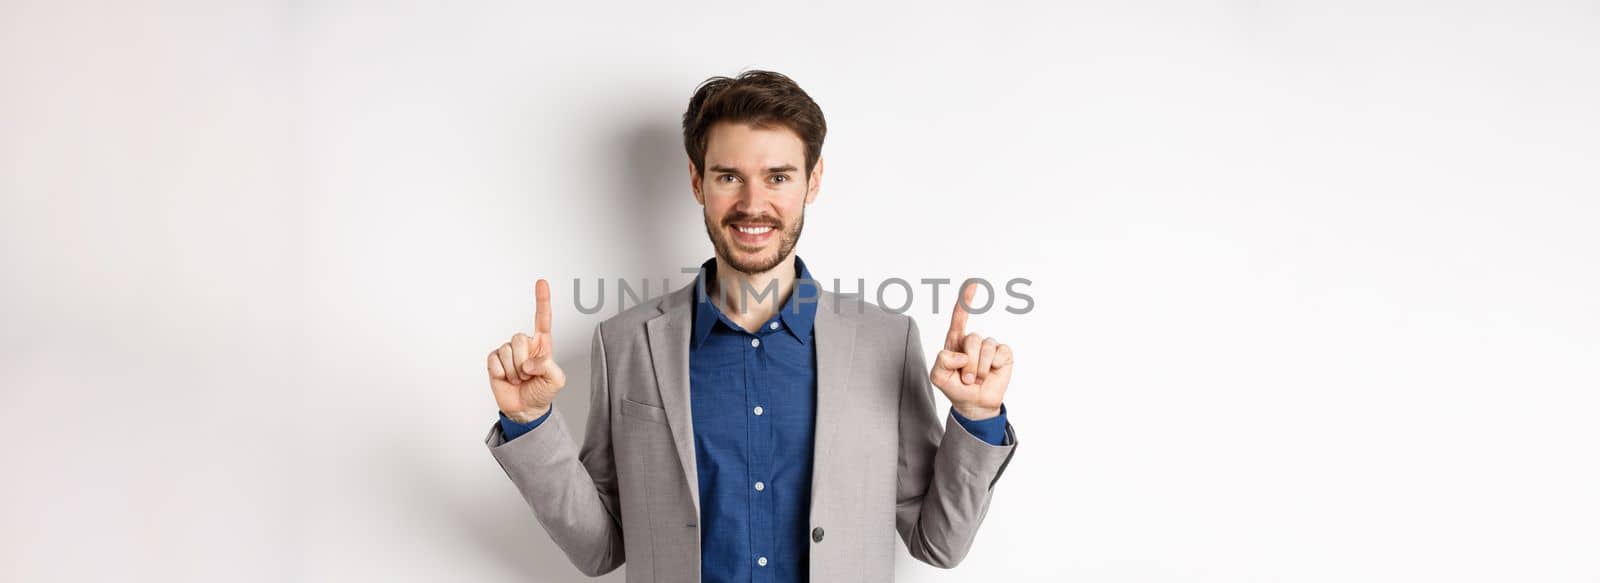 Confident successful businessman pointing fingers up, smiling and showing company logo, standing in suit on white background.